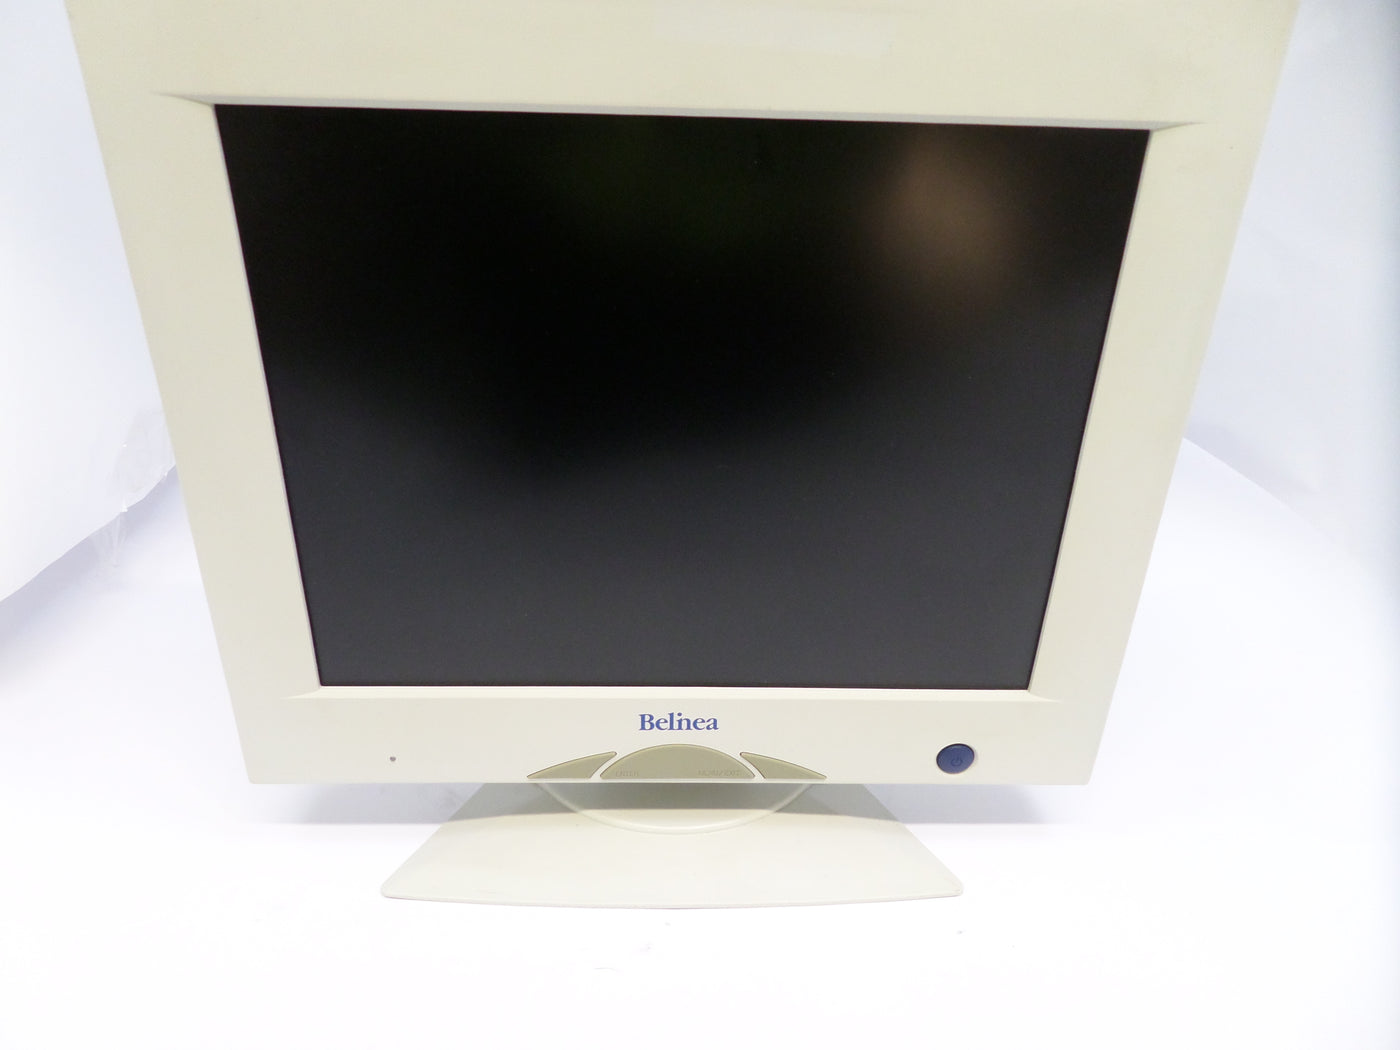 101525 - Belinea 101525 Colour 15" LCD Monitor, Comes With PSU - USED